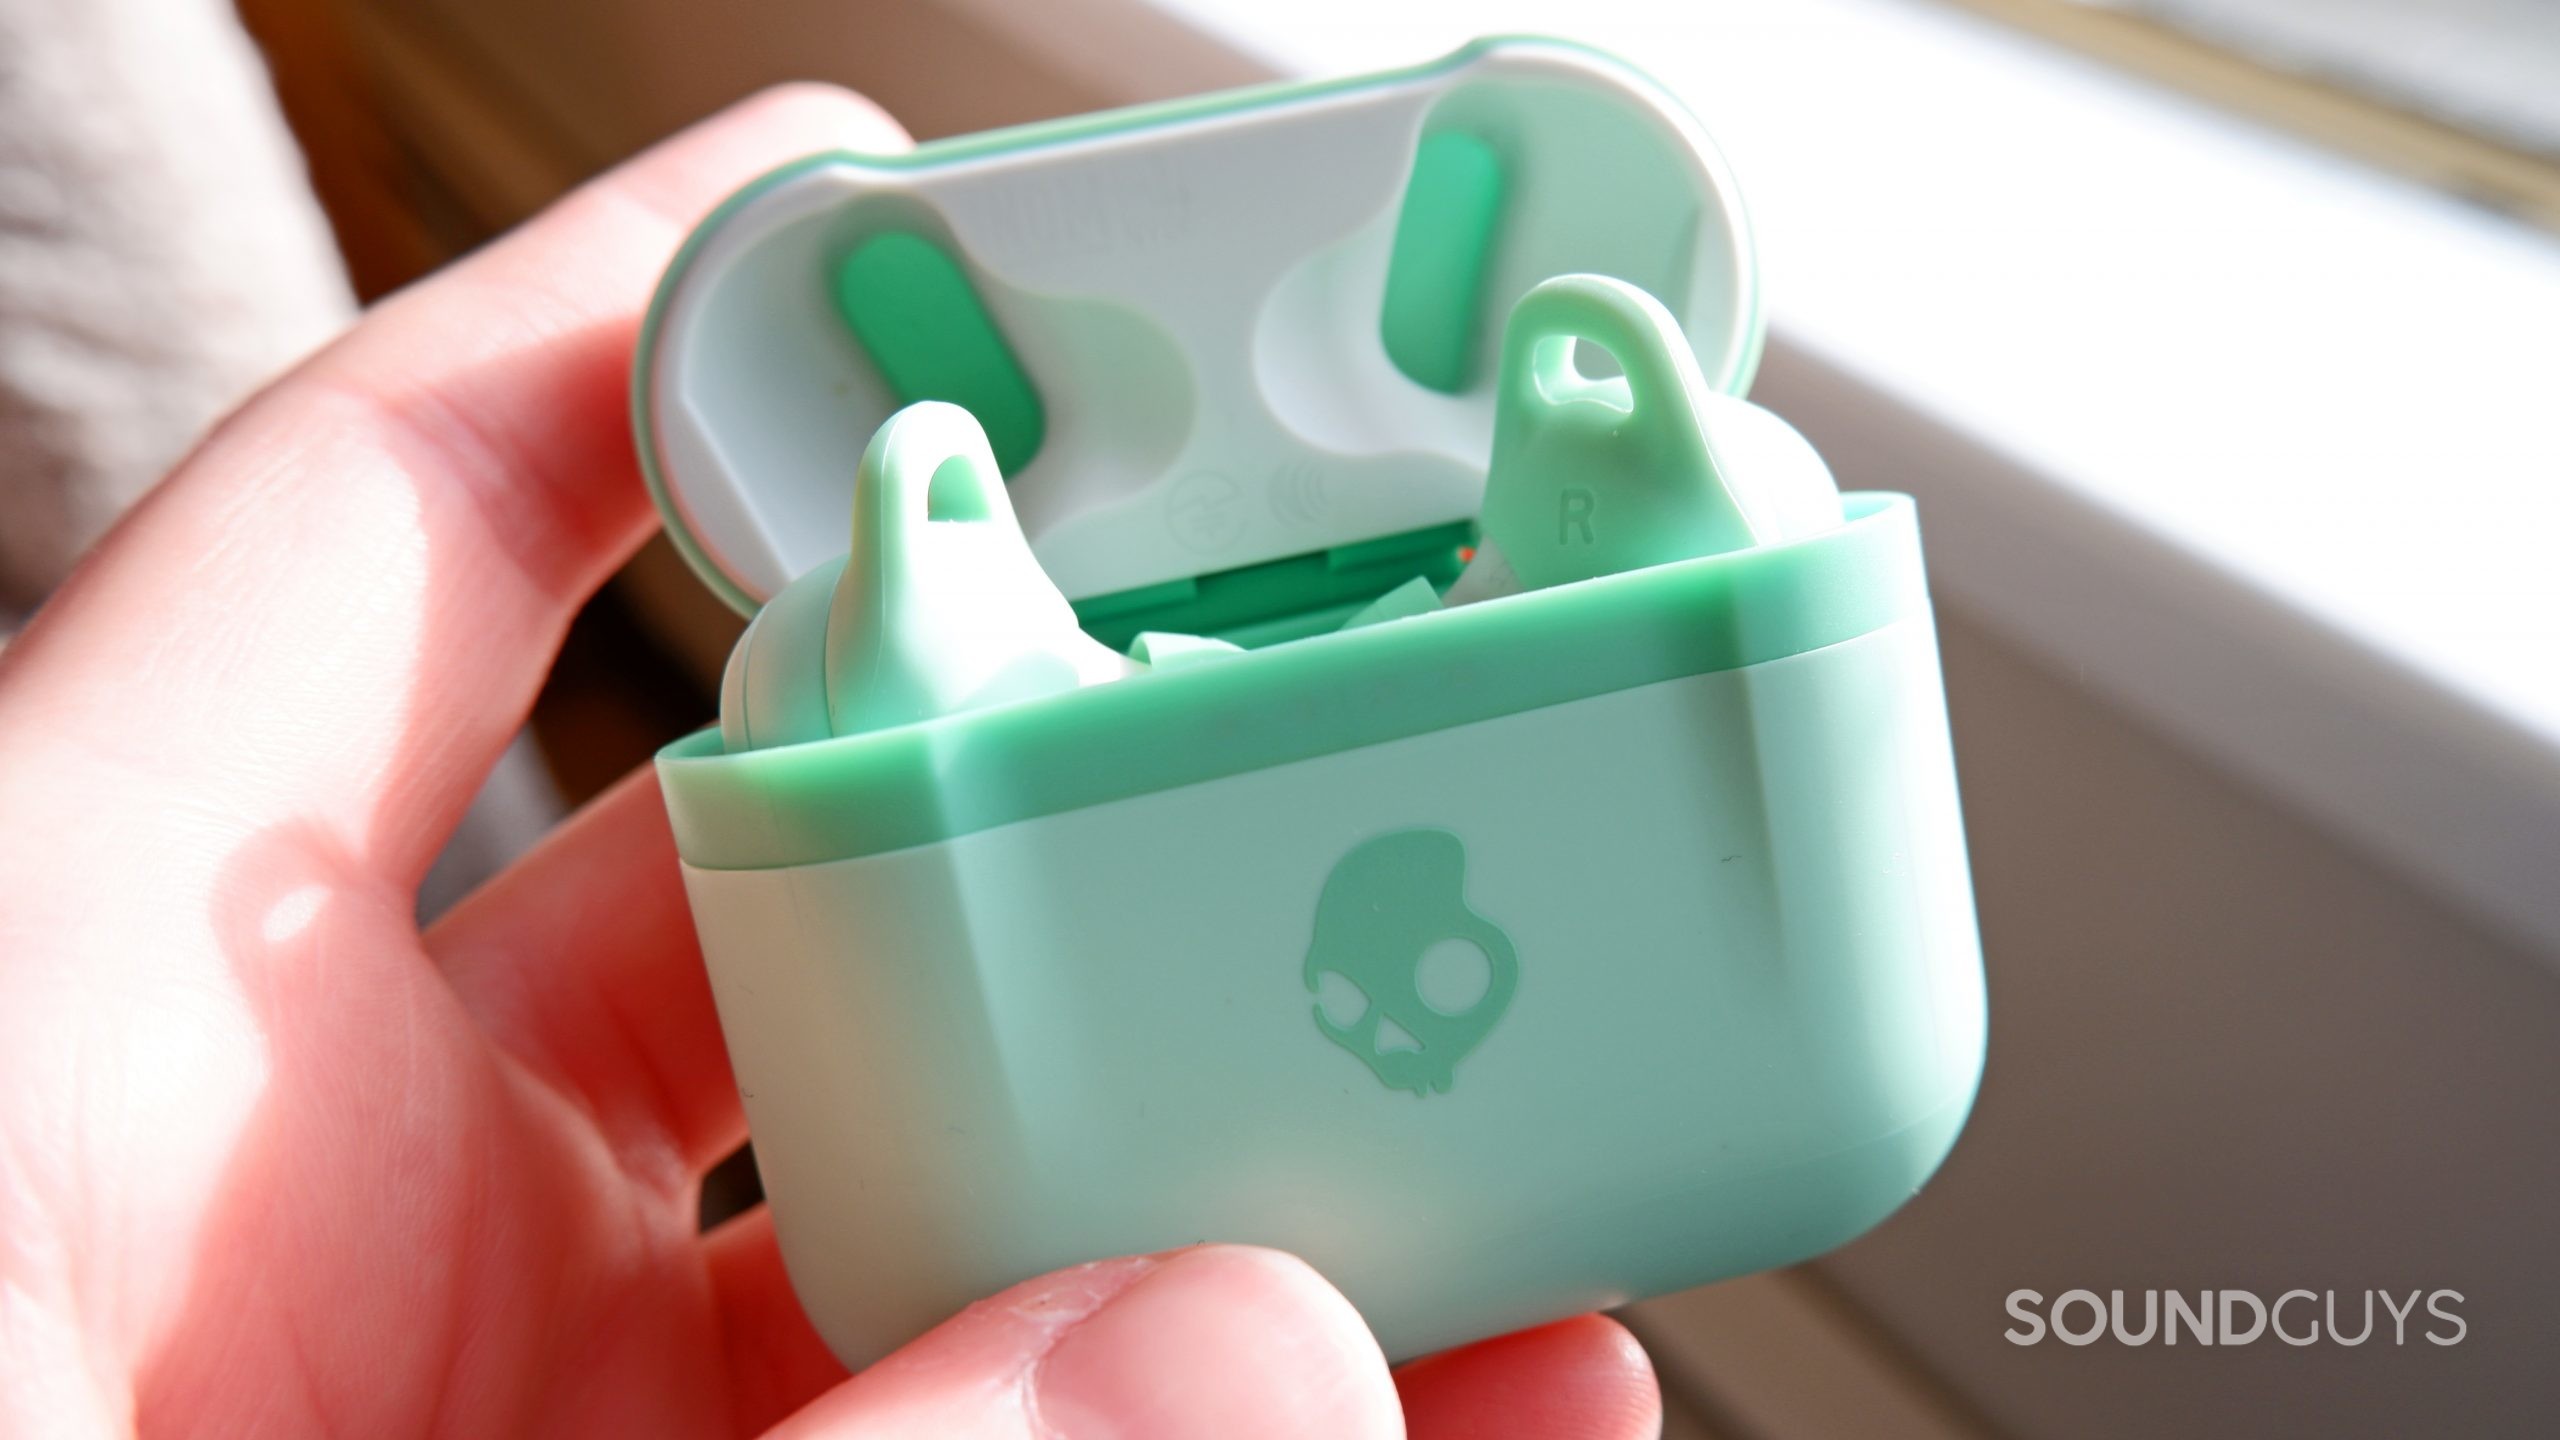 The Skullcandy Indy Evo earbuds inside of the case.